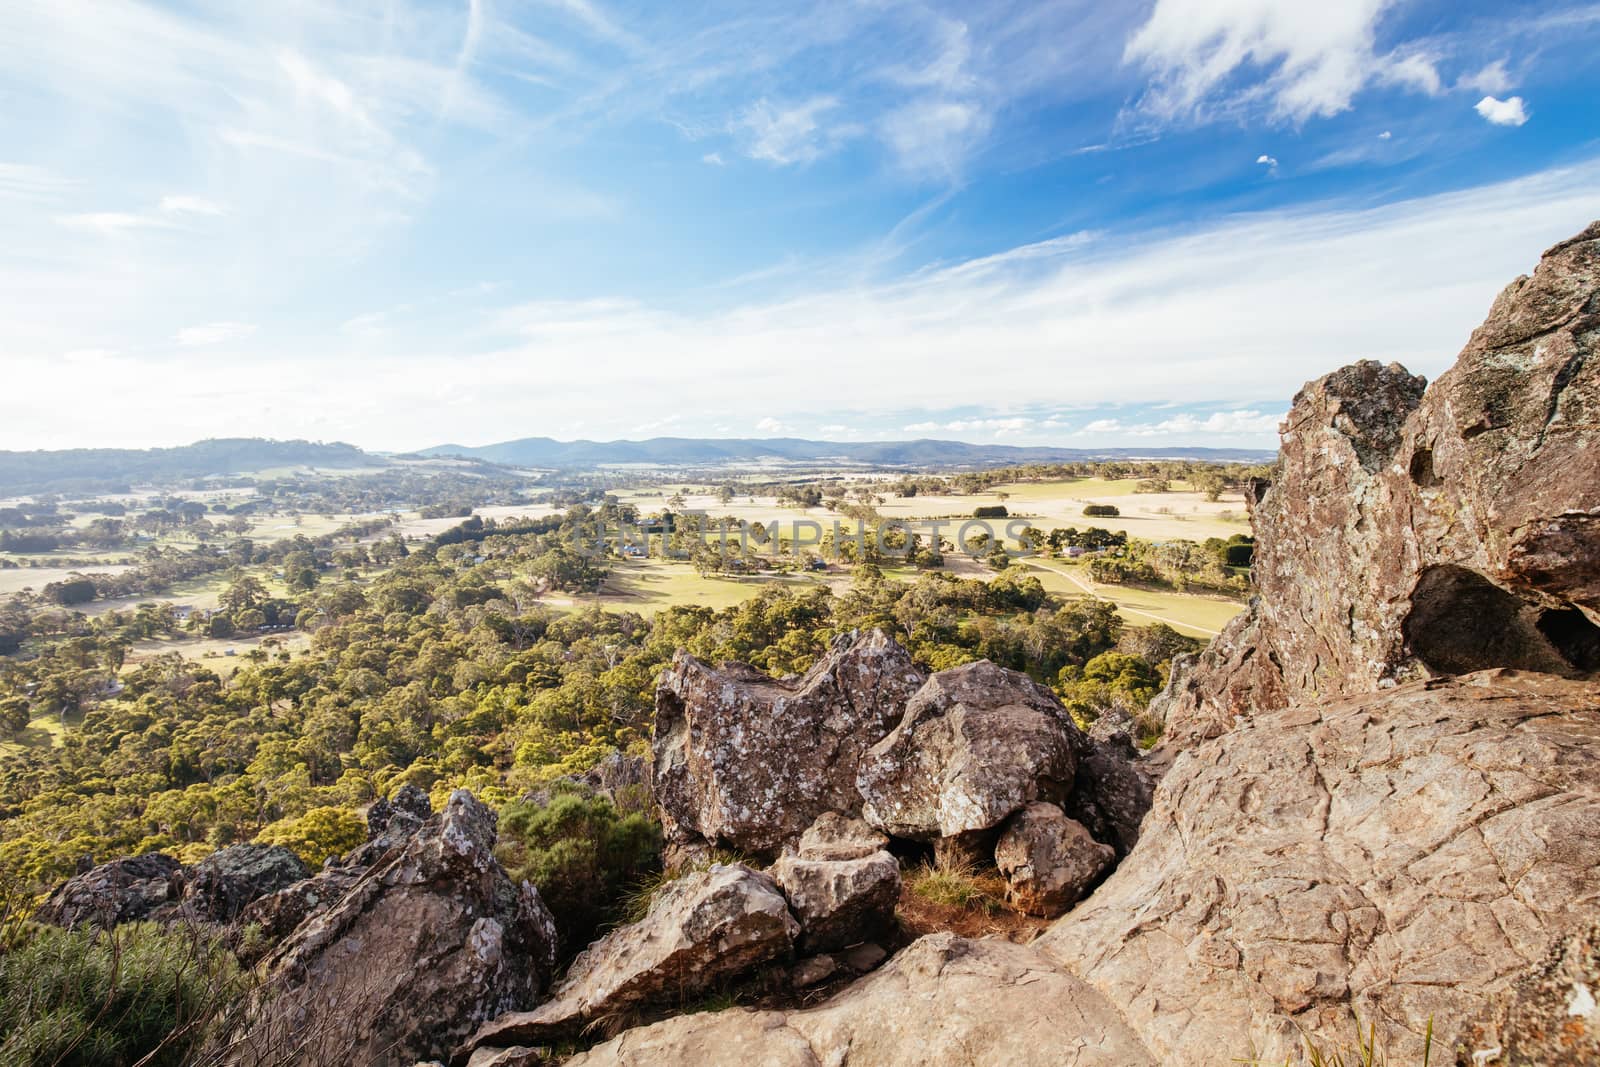 The popular tourist attraction of Hanging Rock. A volcanic group of rocks atop a hill in the Macedon ranges, Victoria, Australia